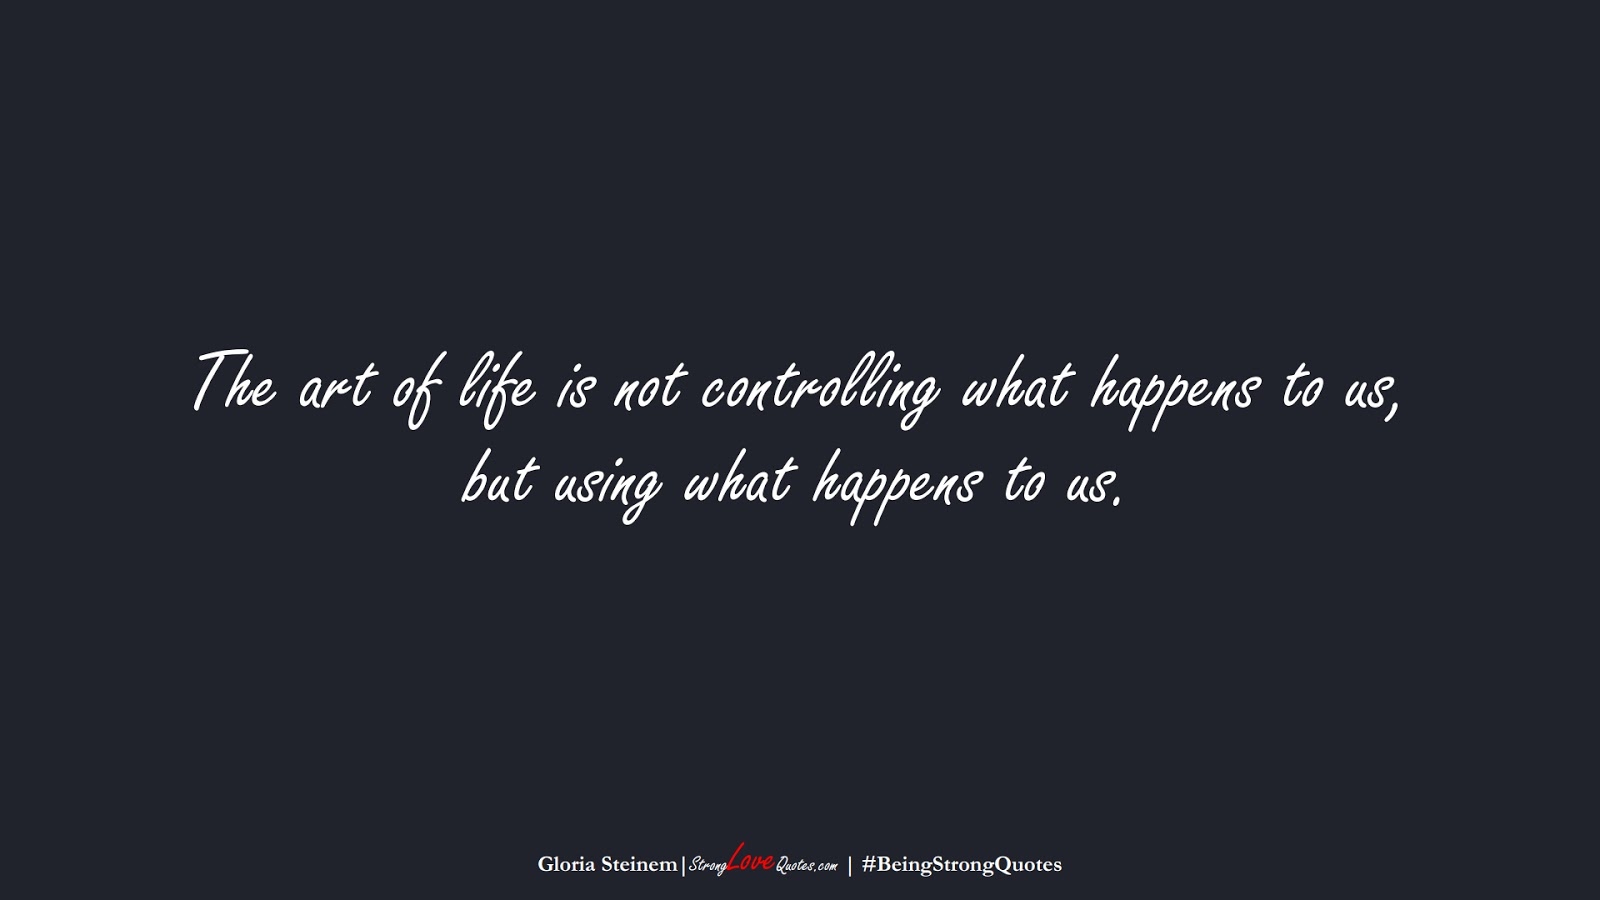 The art of life is not controlling what happens to us, but using what happens to us. (Gloria Steinem);  #BeingStrongQuotes